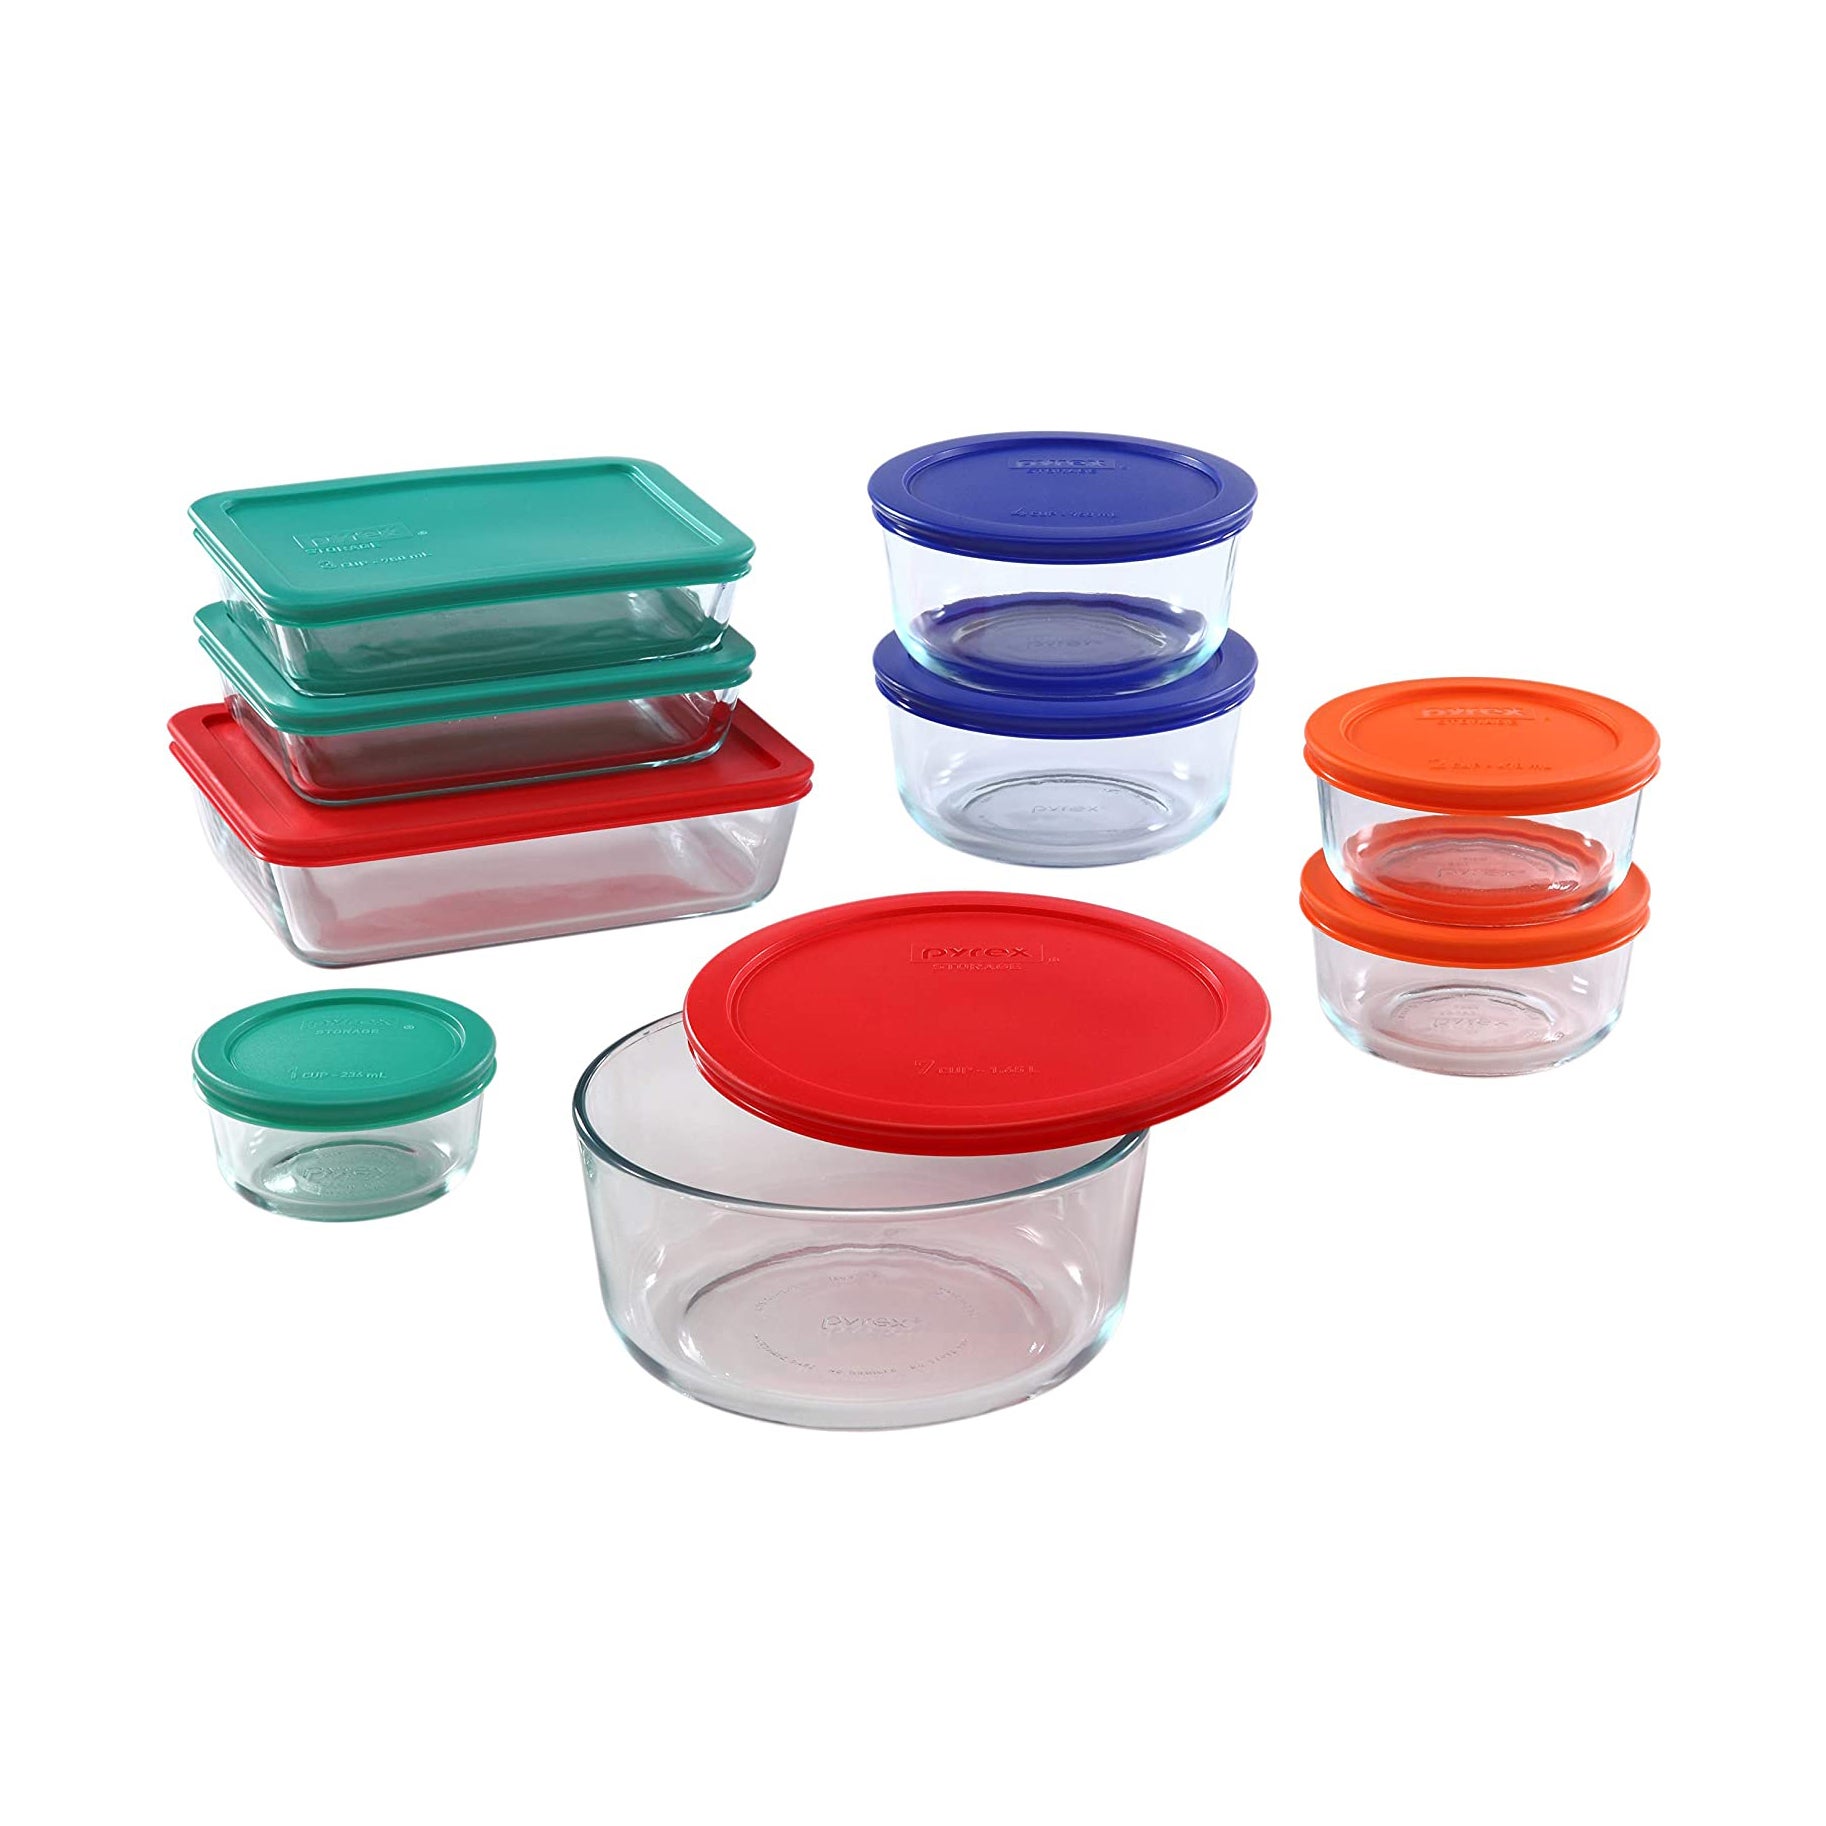 https://www.saveur.com/uploads/2021/07/30/The-Best-Food-Storage-Container-Option-Pyrex-Simply-Store-Meal-Prep-Glass-Food-Storage-Containers-18-Piece-Set.jpg?auto=webp